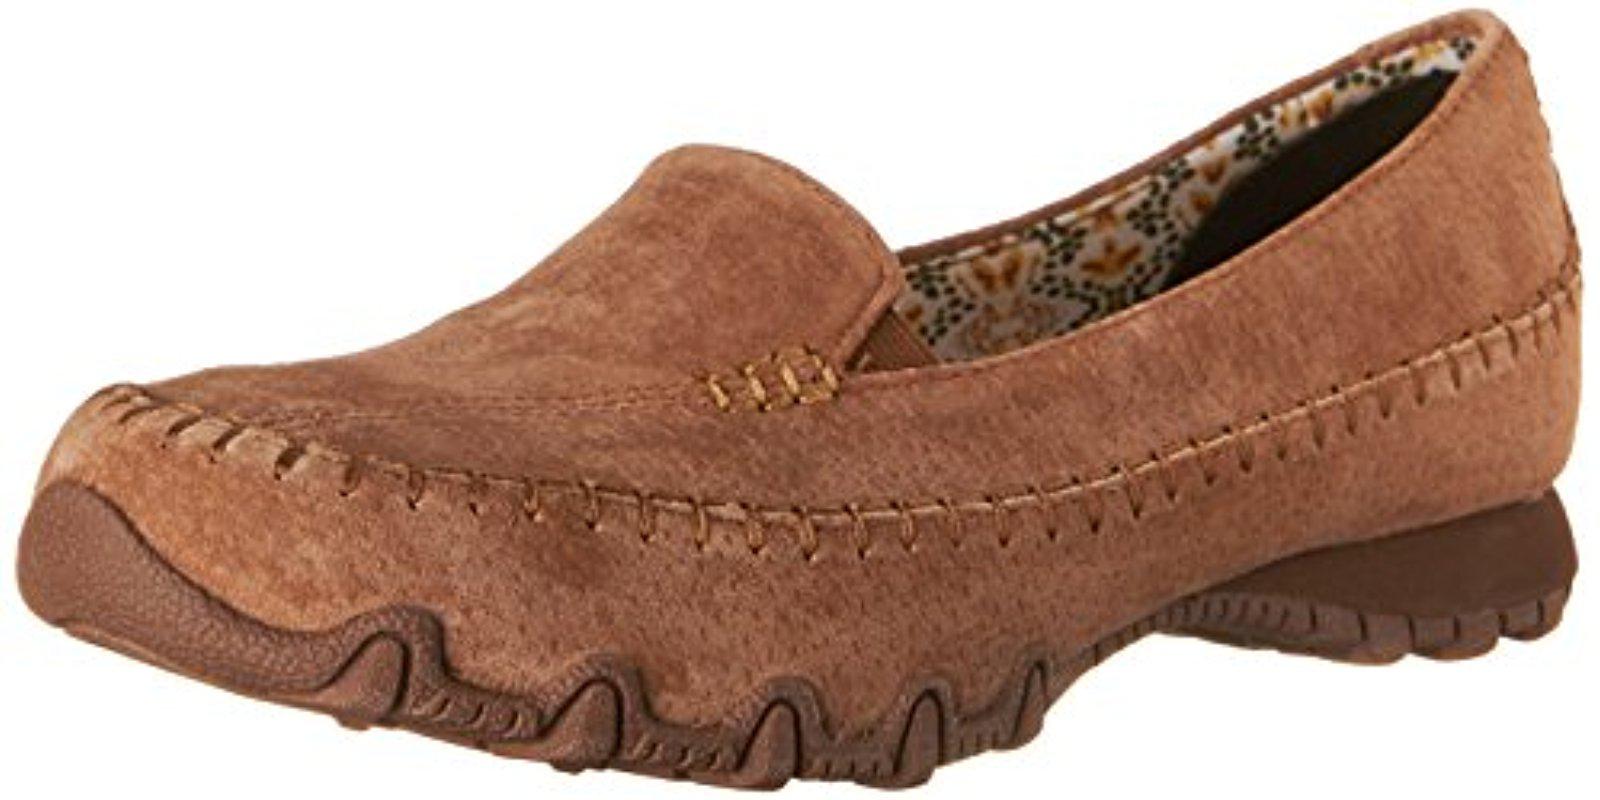 Skechers Suede Relaxed Fit Pedestrian 